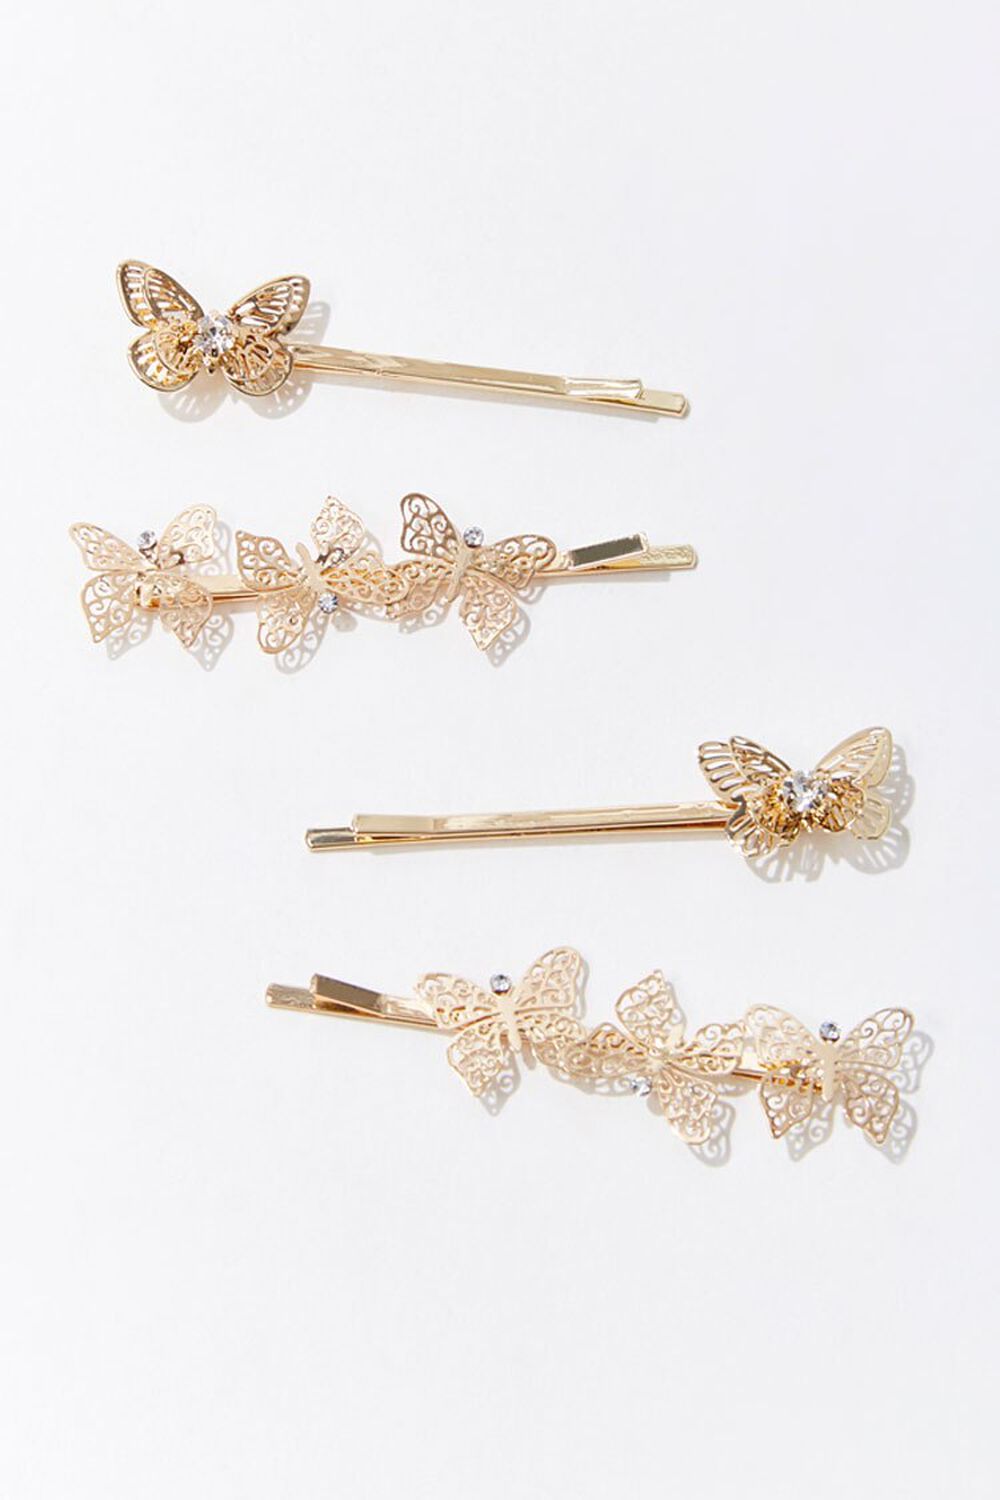 GOLD Butterfly Bobby Pin Set, image 1